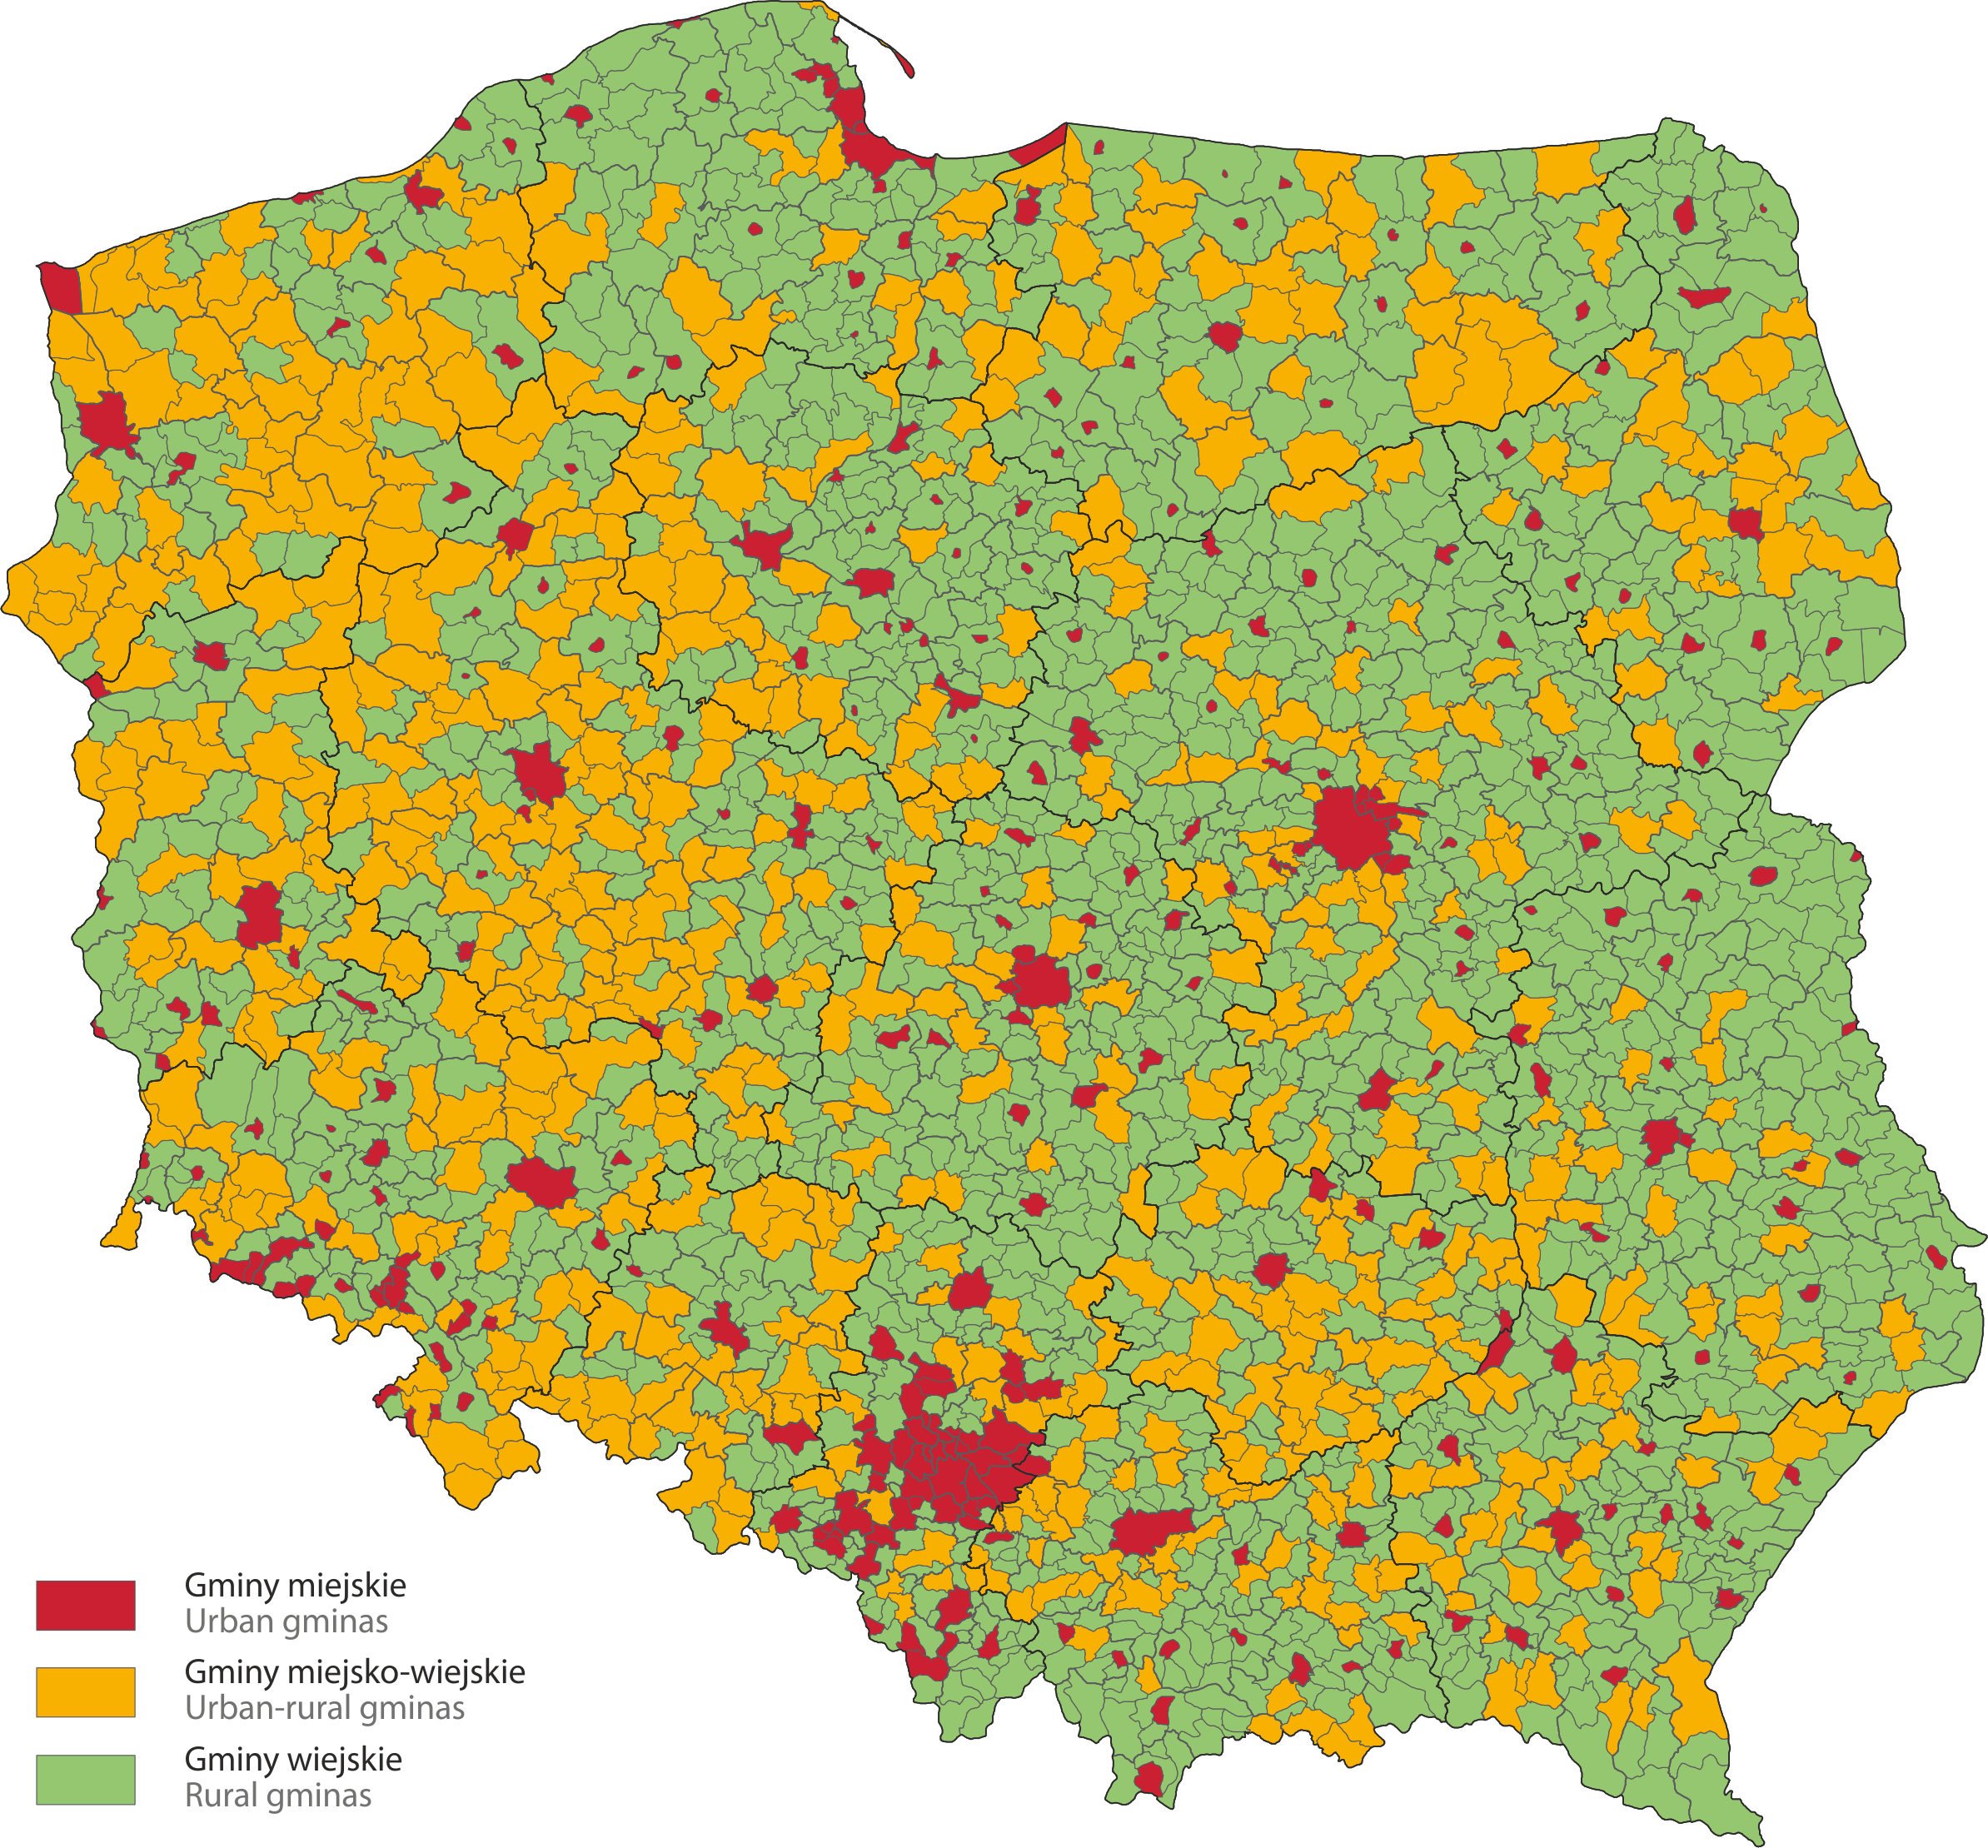 Types of gminas in Poland according to the TERYT register as of 1 January 2022